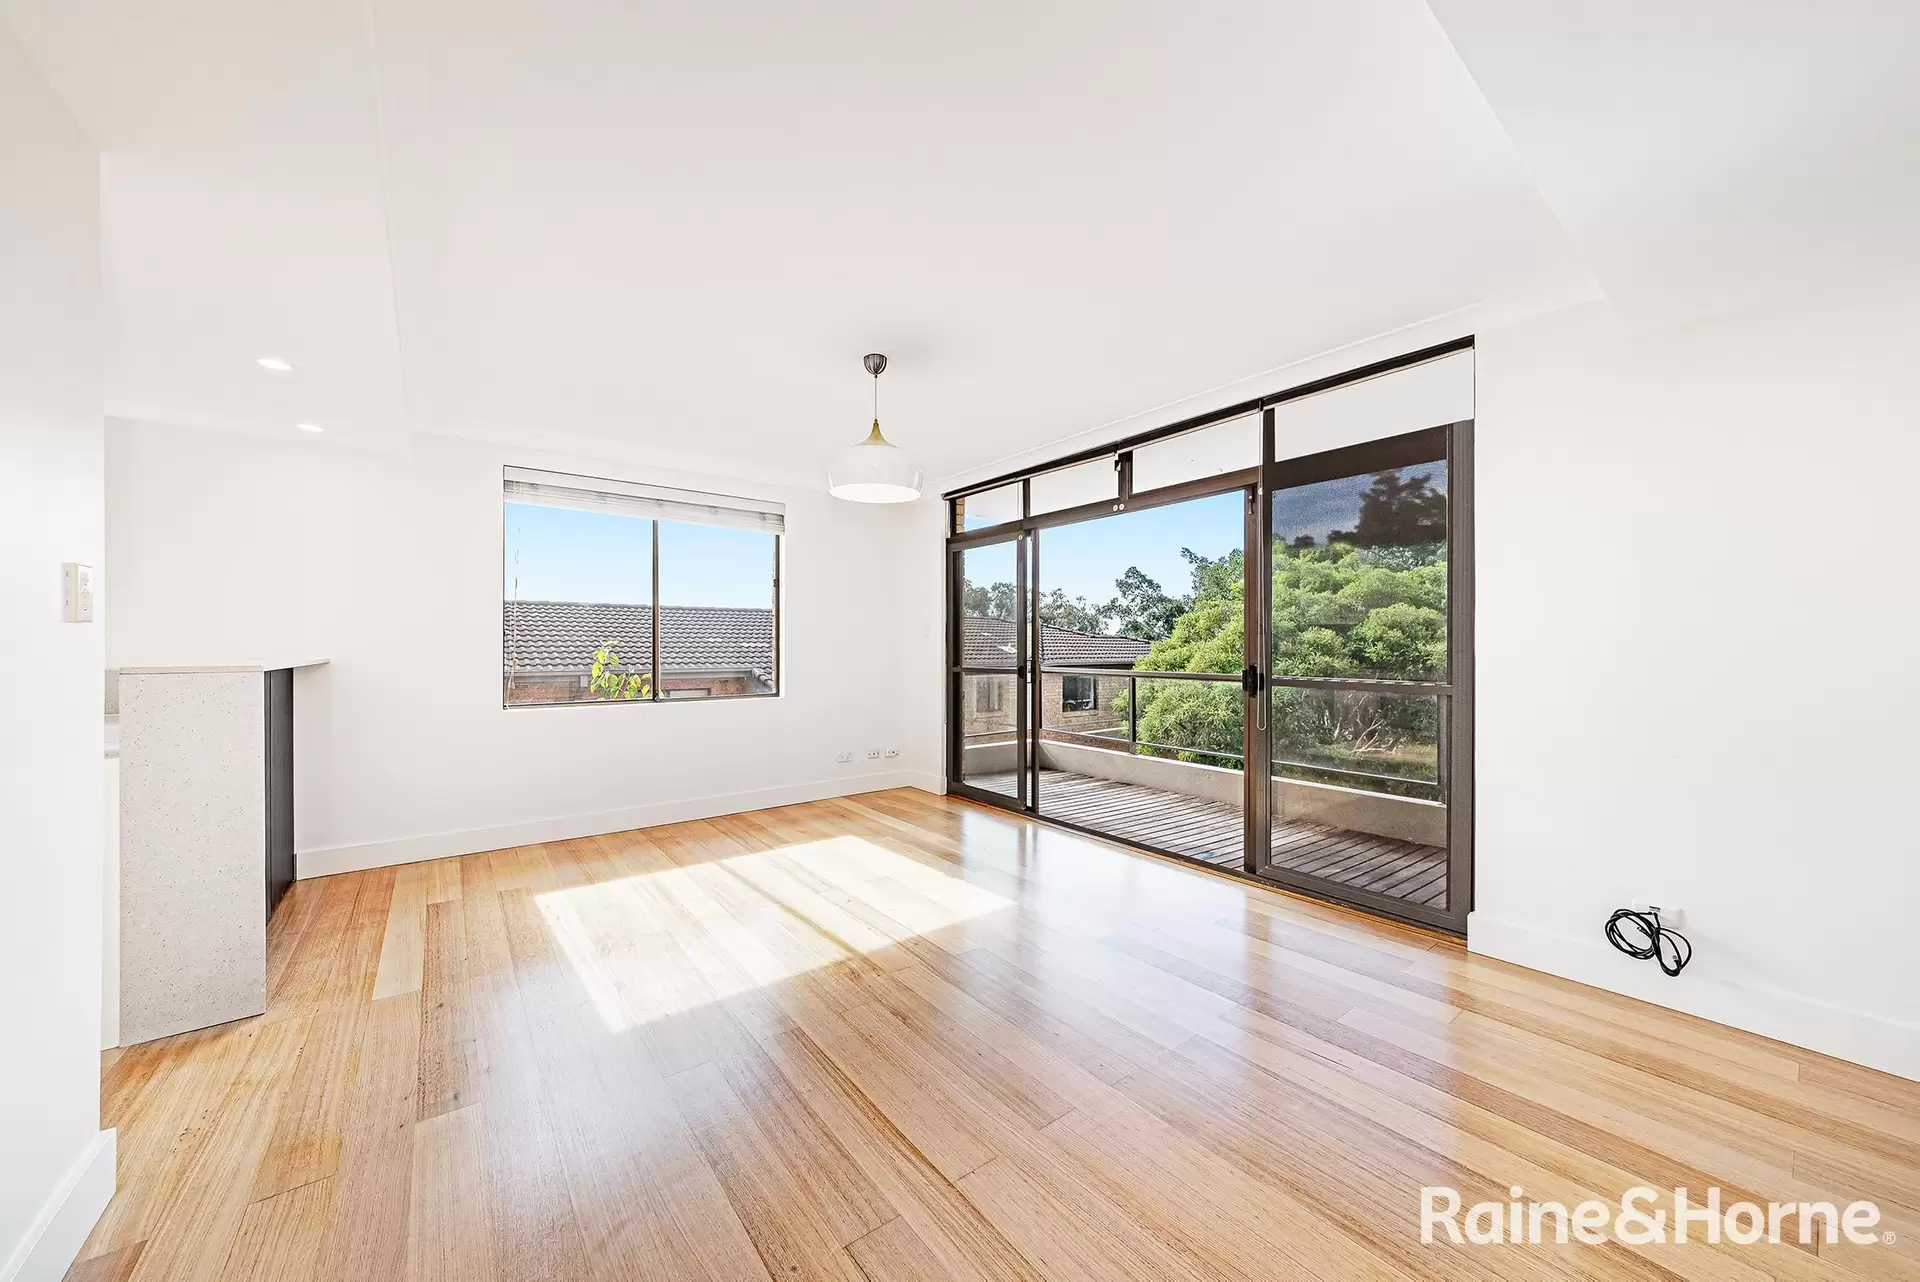 6/84 Melody Street, Coogee For Lease by Raine & Horne Randwick | Coogee